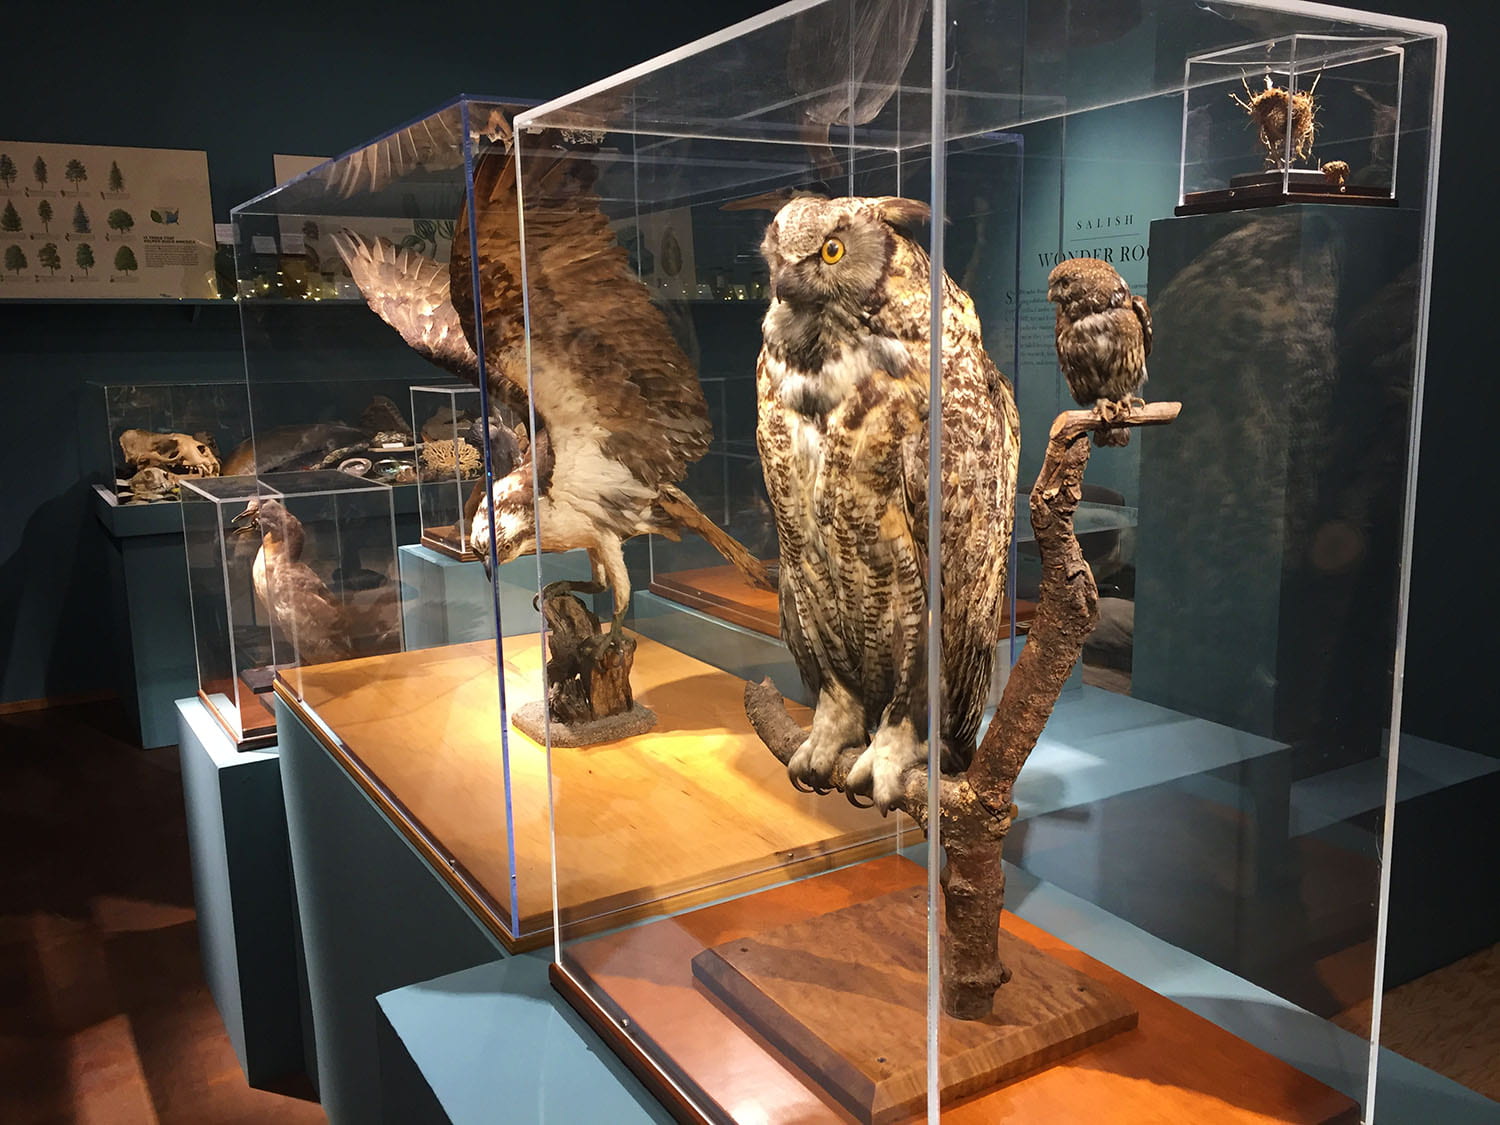 taxidermied birds in display cases: a large and small owl, osprey, and a duck